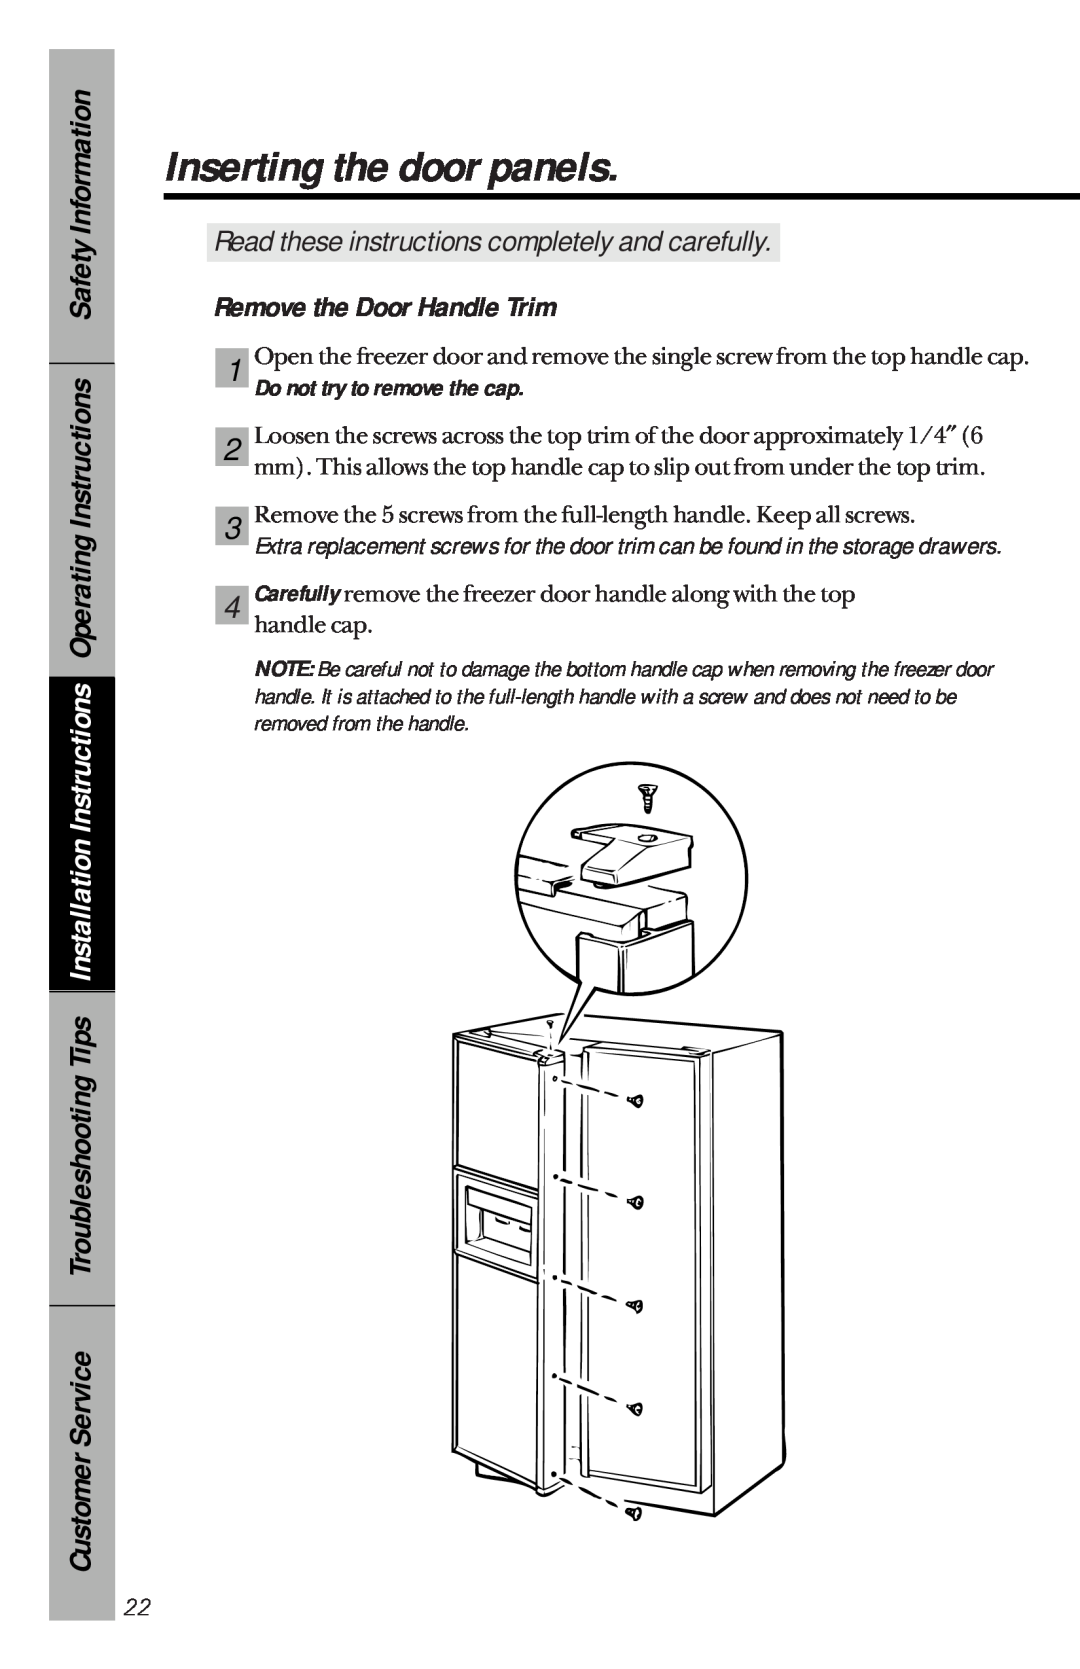 GE 162D3941P005 Inserting the door panels, Remove the Door Handle Trim, Read these instructions completely and carefully 